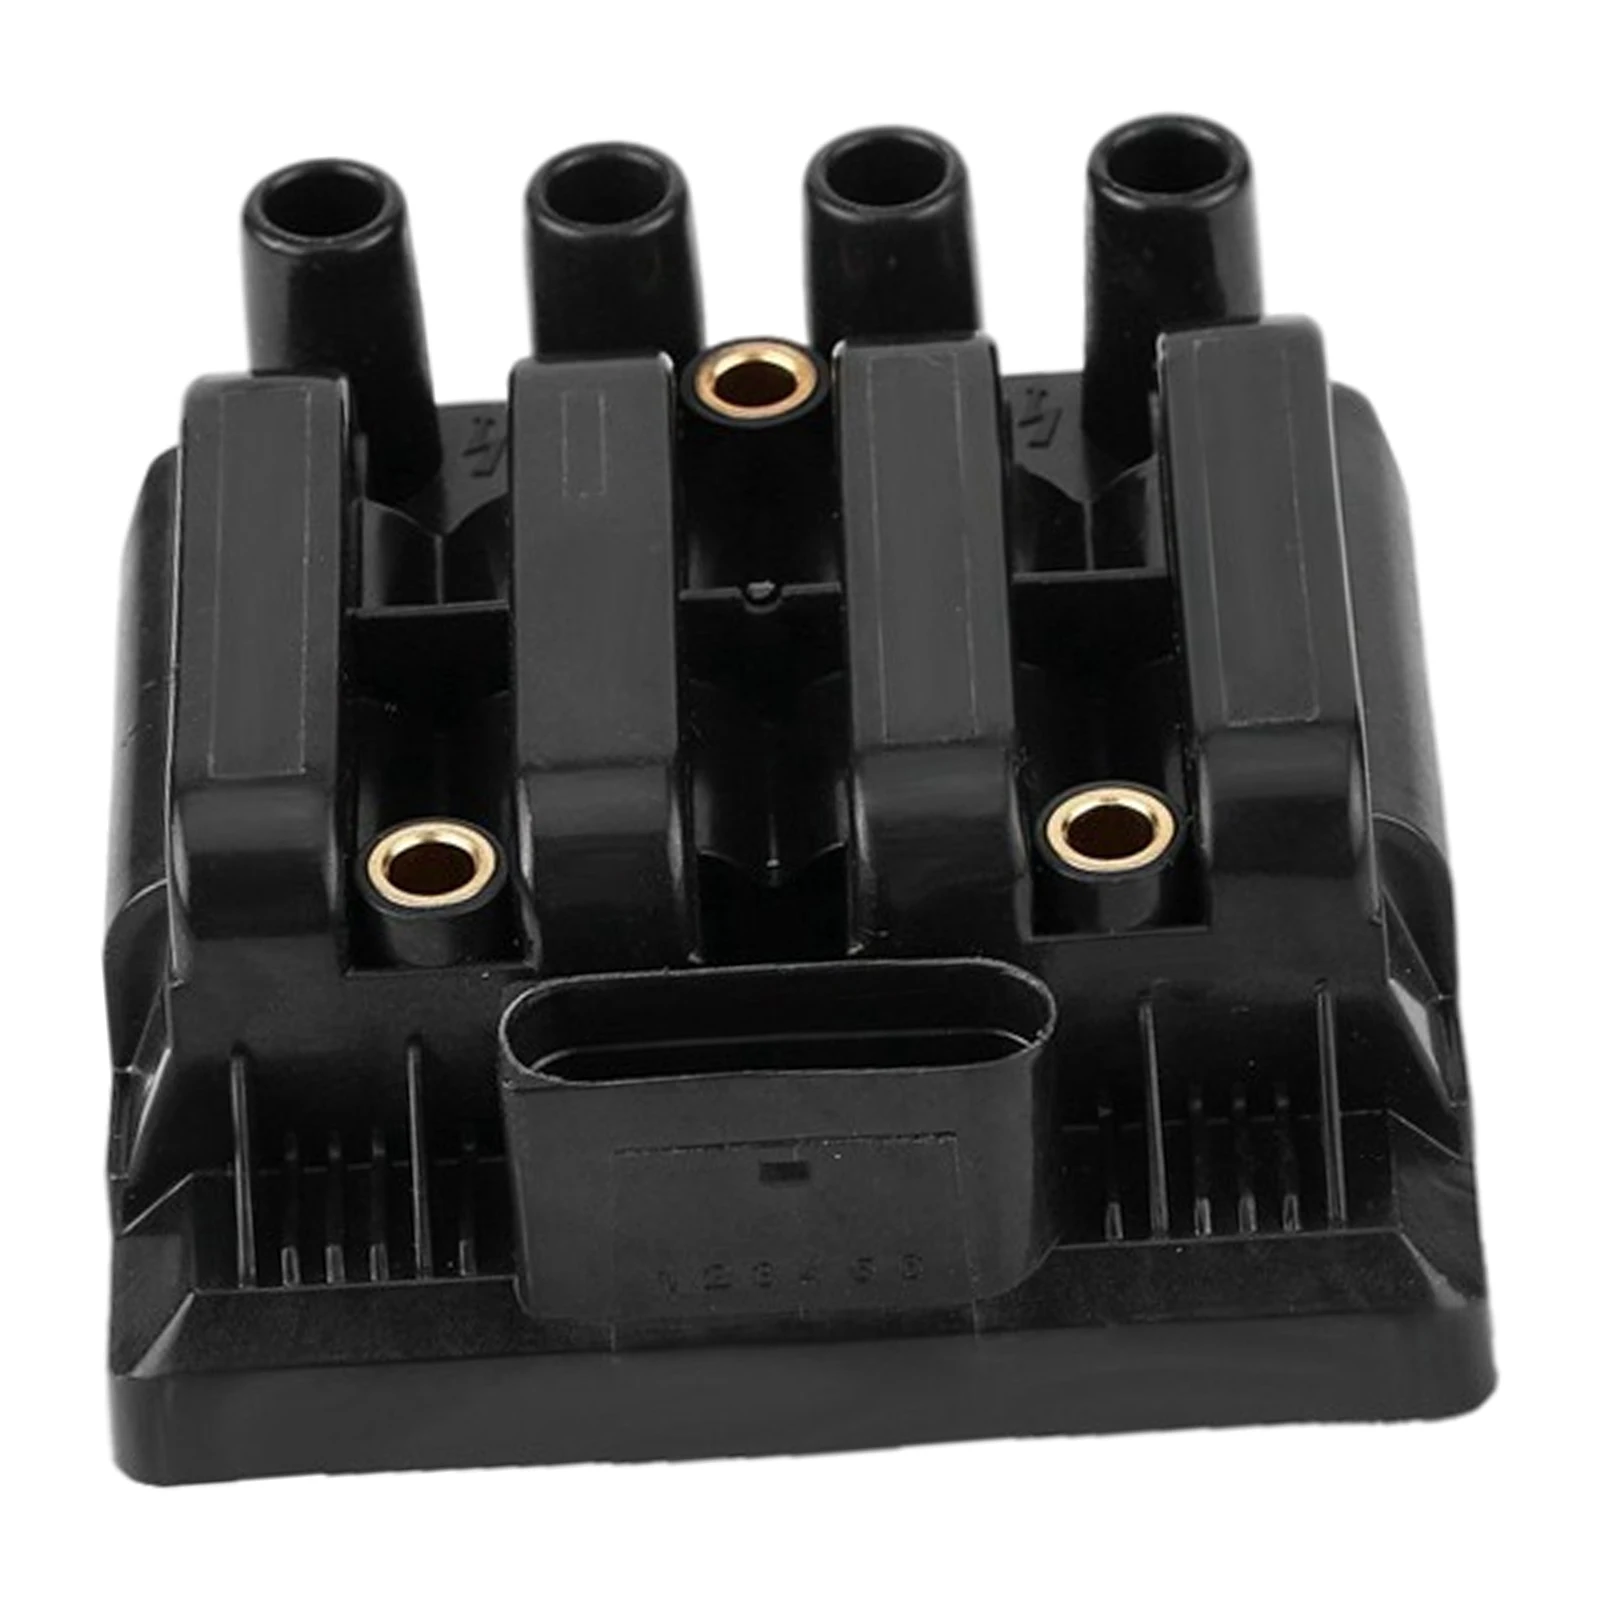 Portable Spare Car Ignition Coil UF484 Replacement For VW Jetta Beetle L4 2.0L C1393 2003 2004 Car Accessories